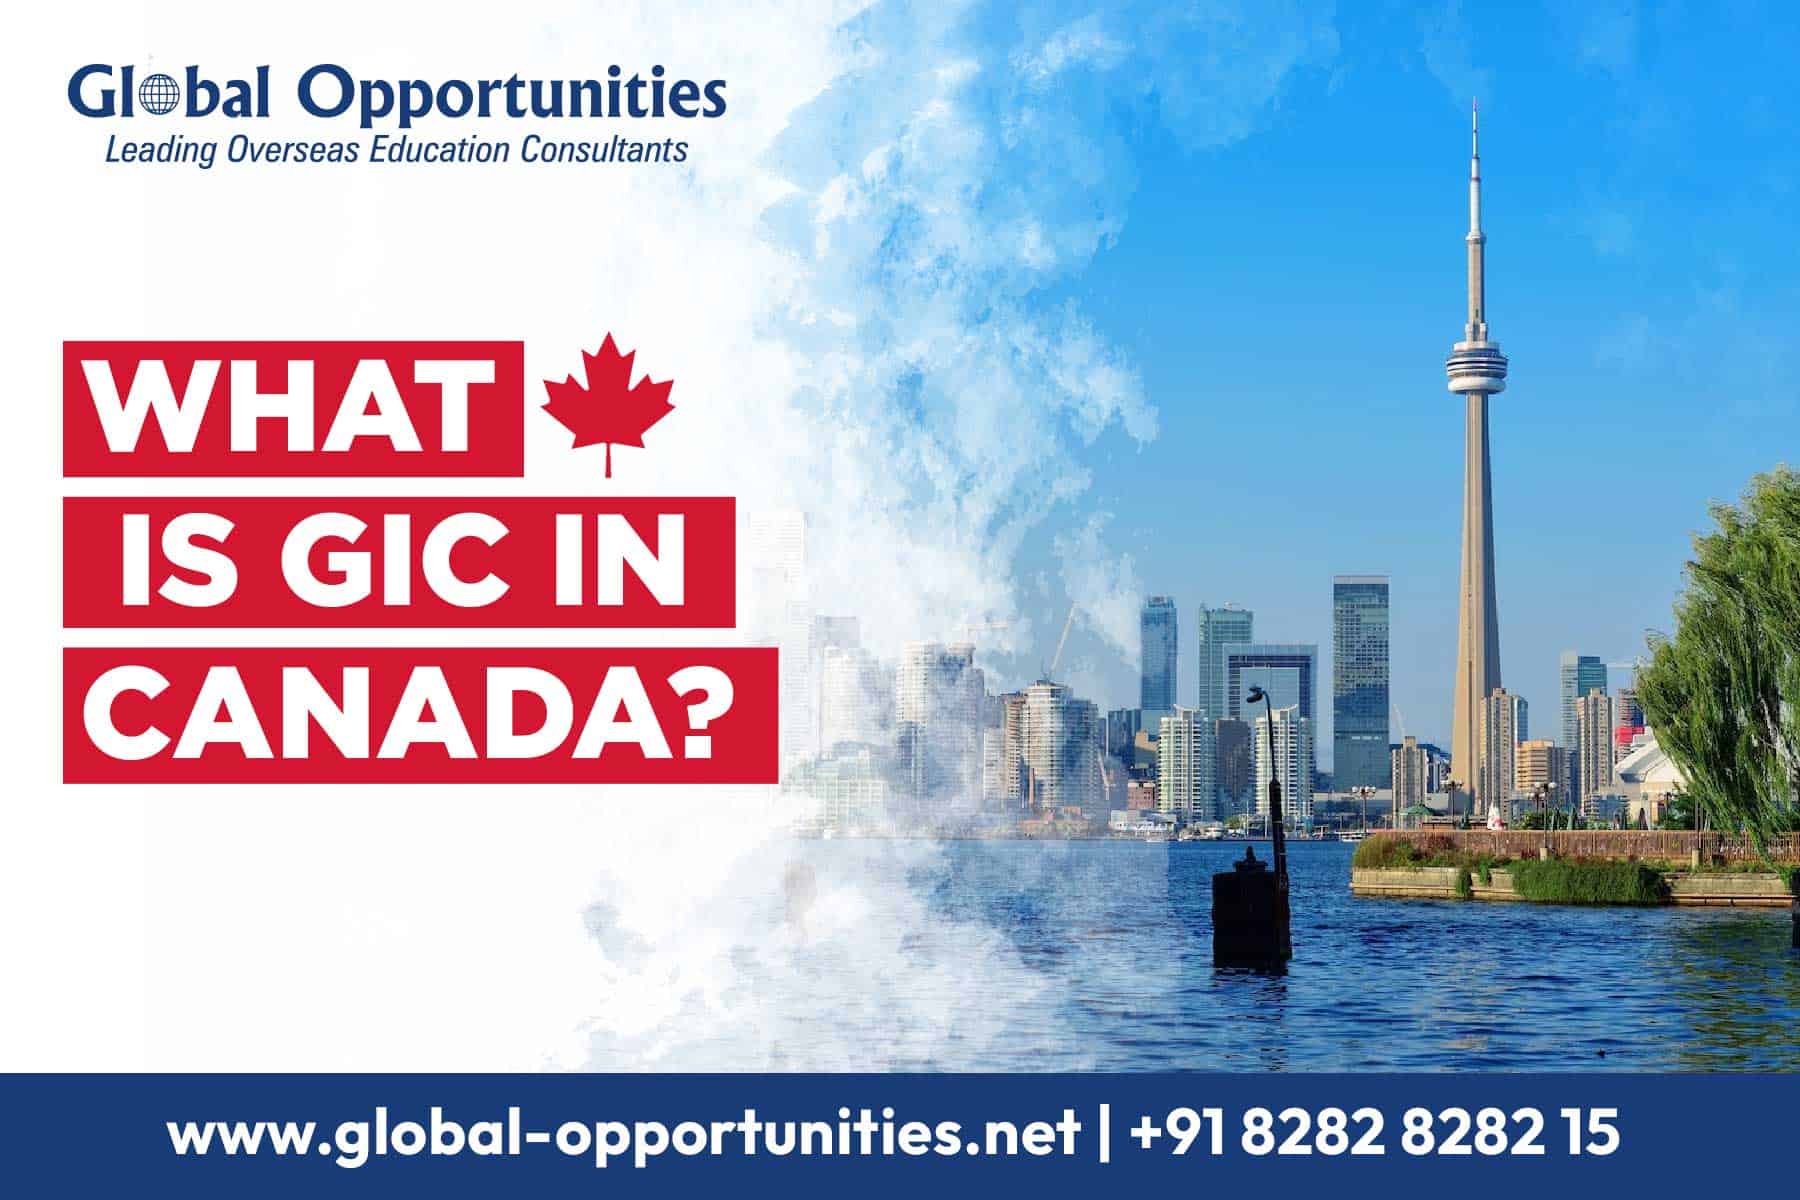 What is GIC in Canada?